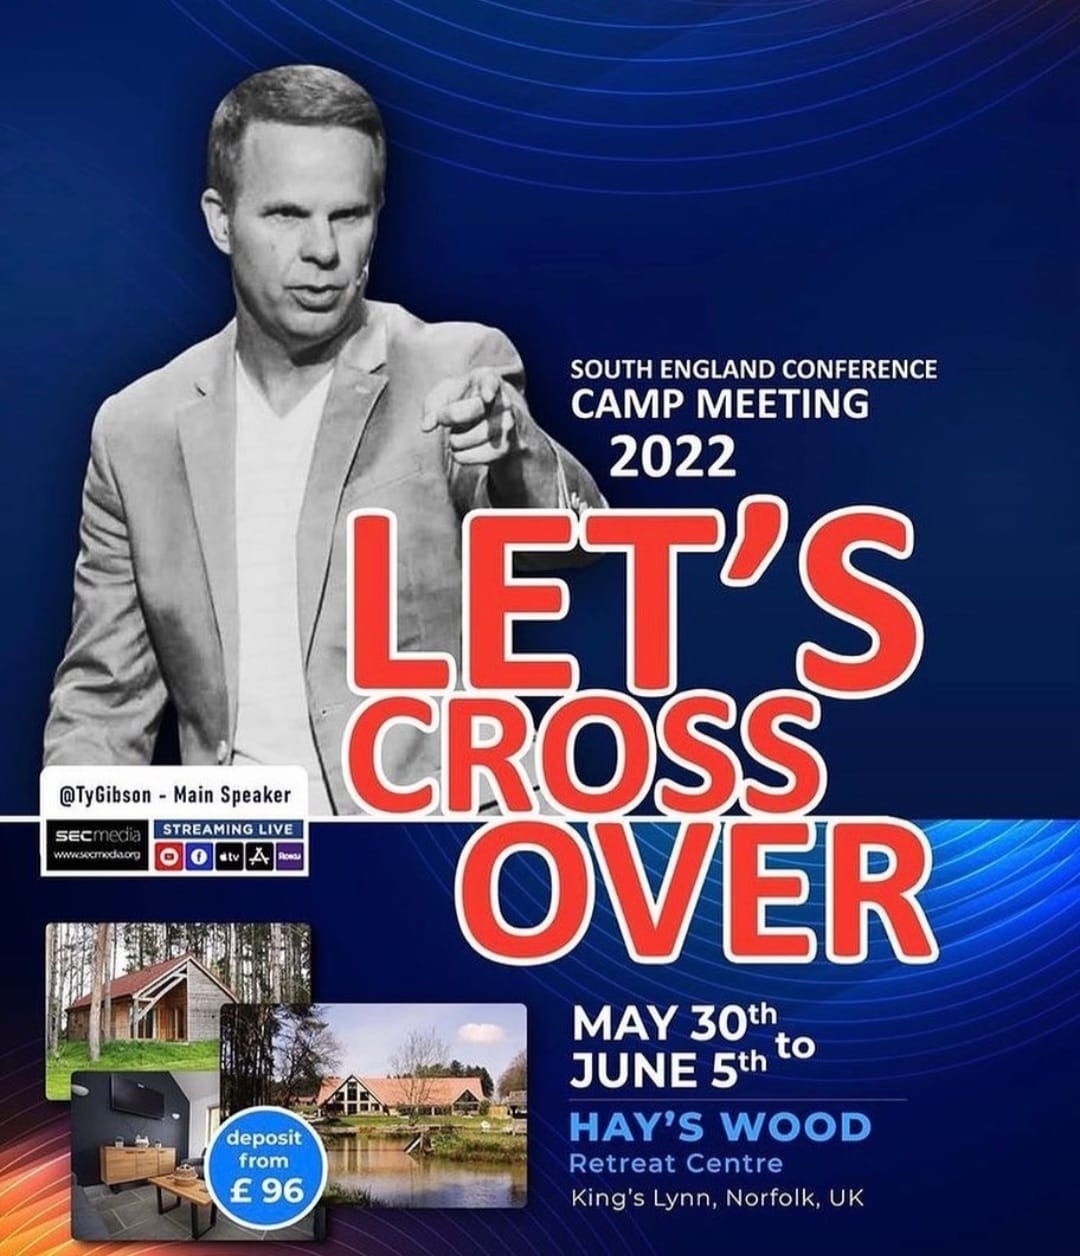 Camp Meeting 2022 - Let's Cross Over